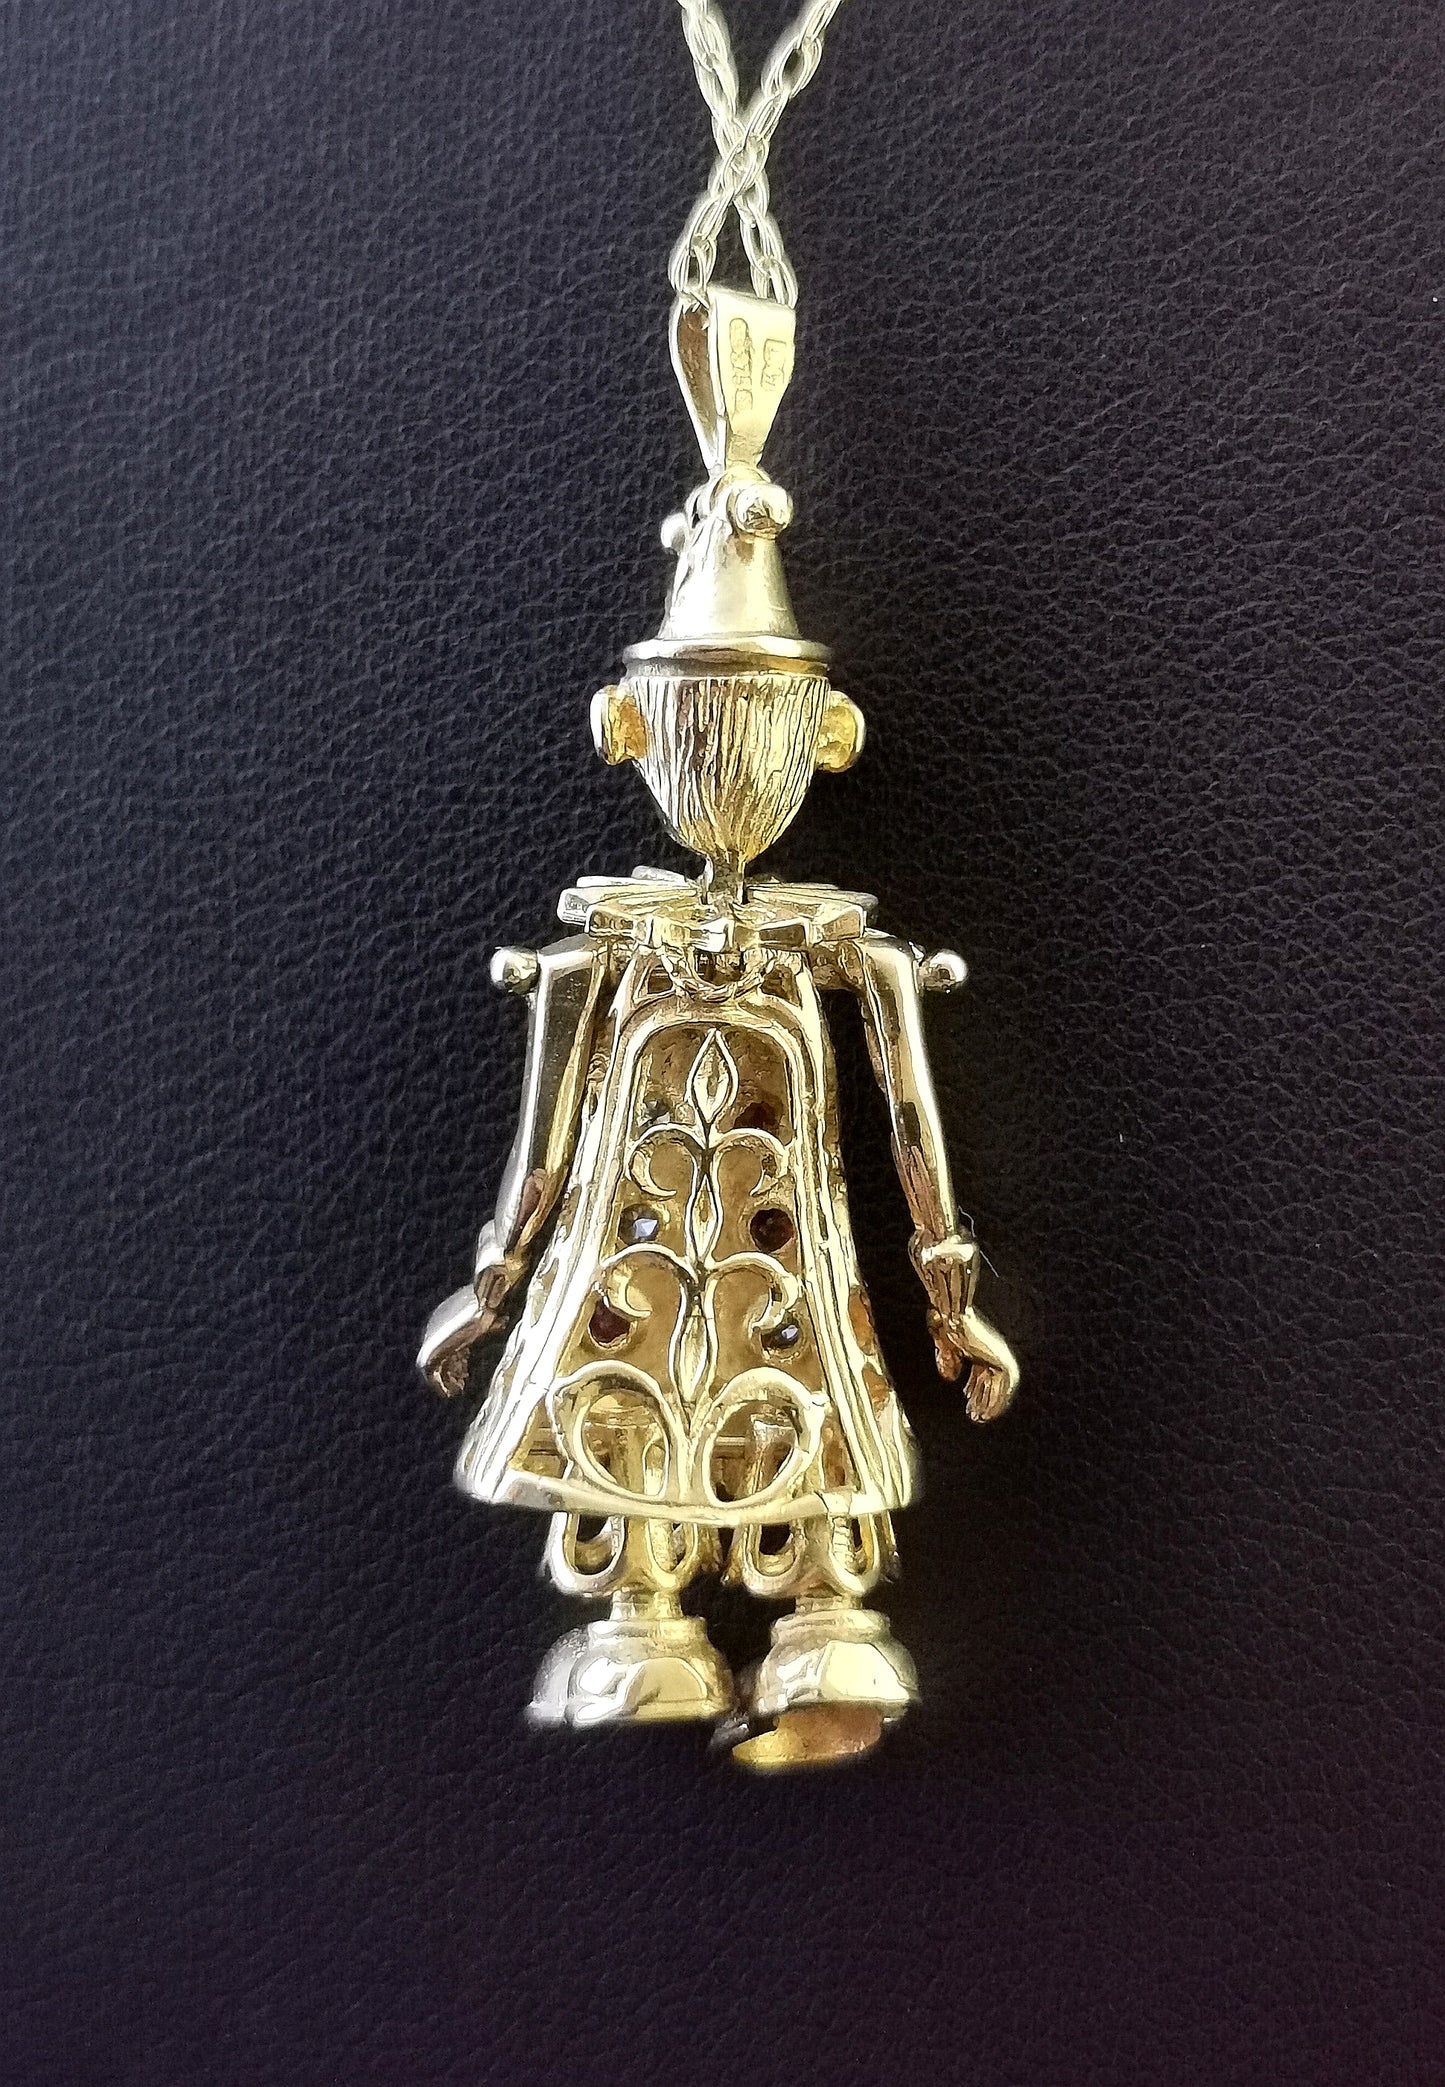 Vintage 9ct gold clown pendant, chain necklace, articulated